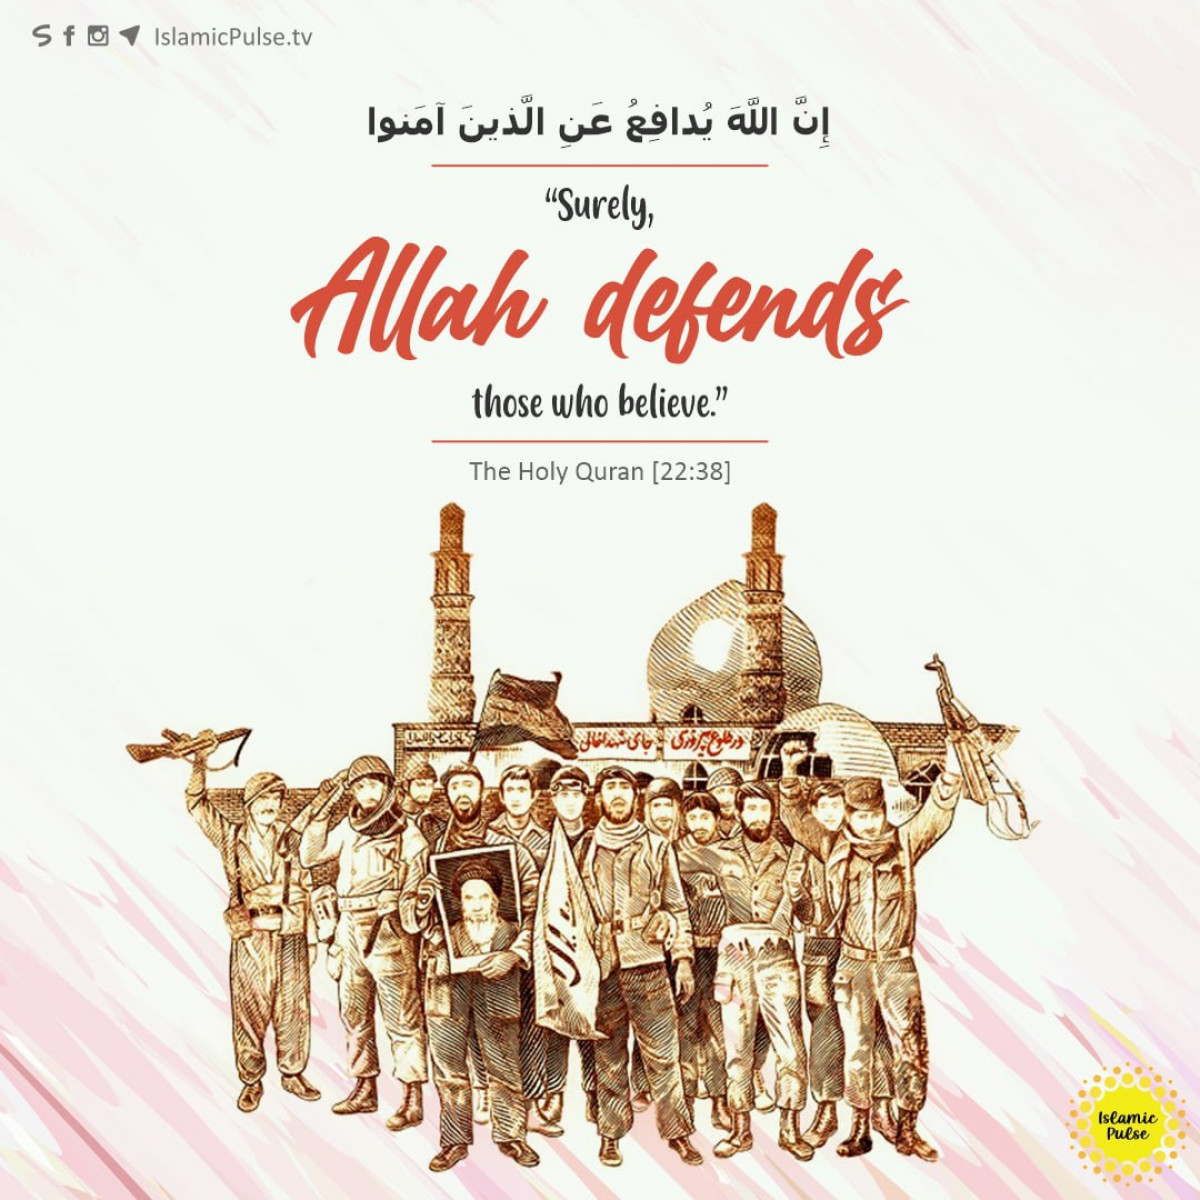 "Surely, Allah defends those who believe."